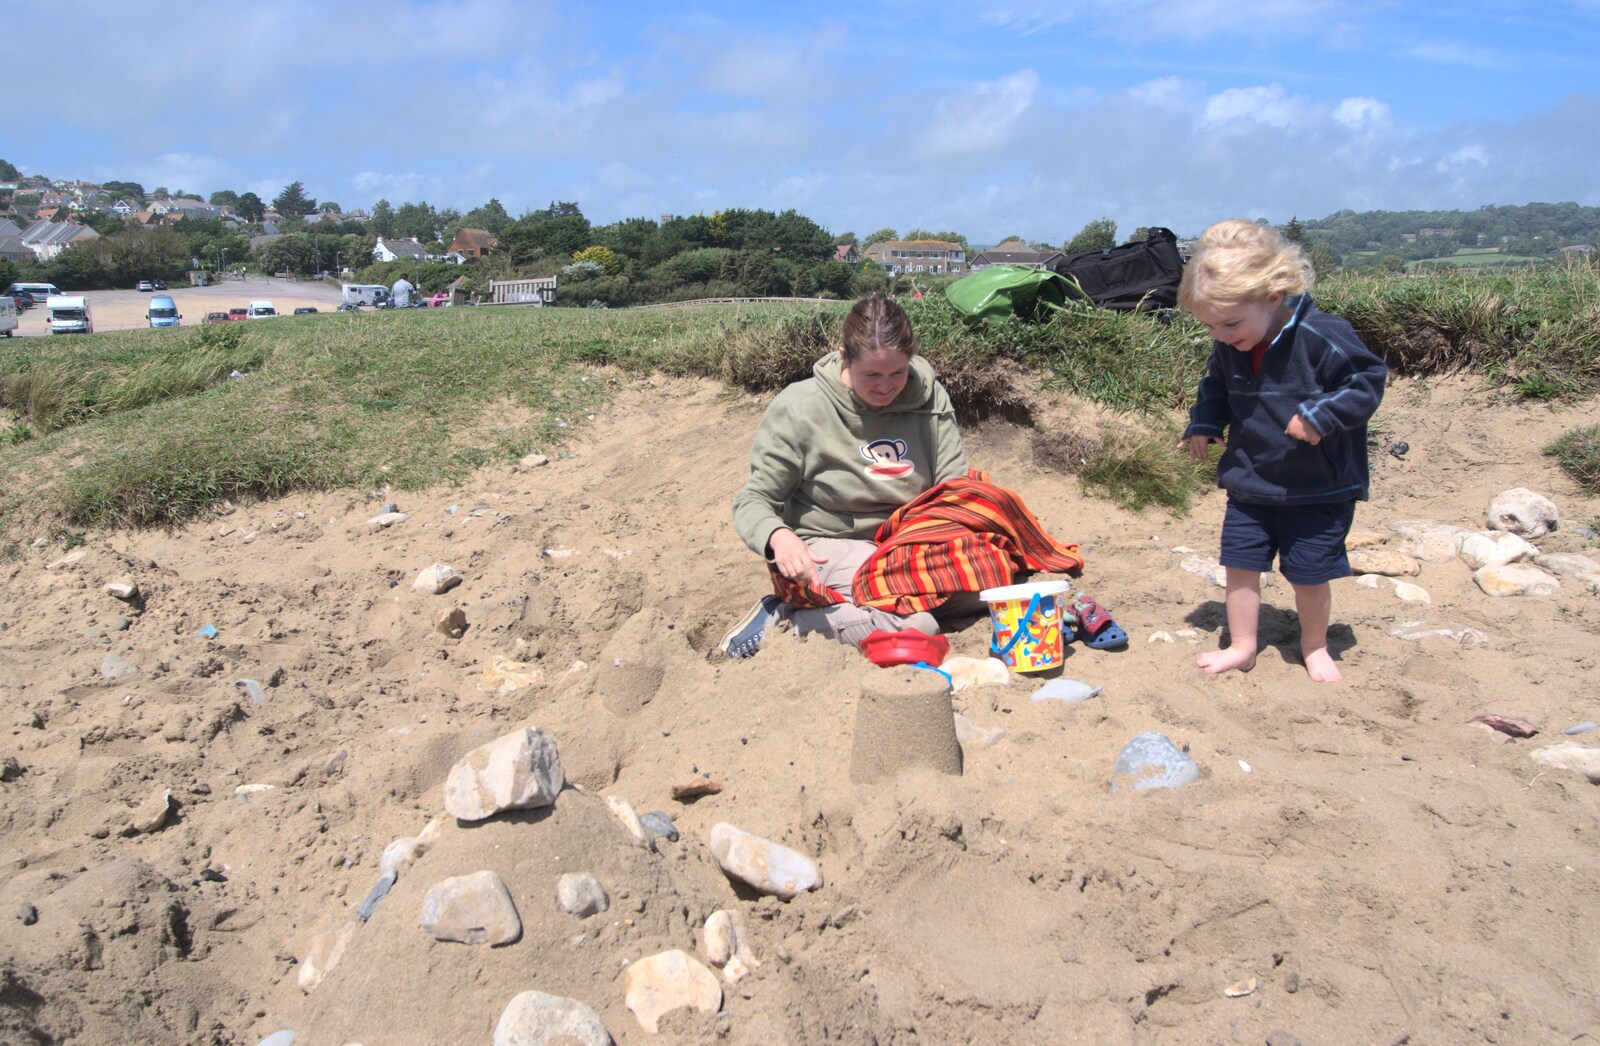 Isobel and Fred build a sand castle on the beach from A Camper Van Odyssey: Charmouth, Plymouth, Dartmoor and Bath - 20th June 2011